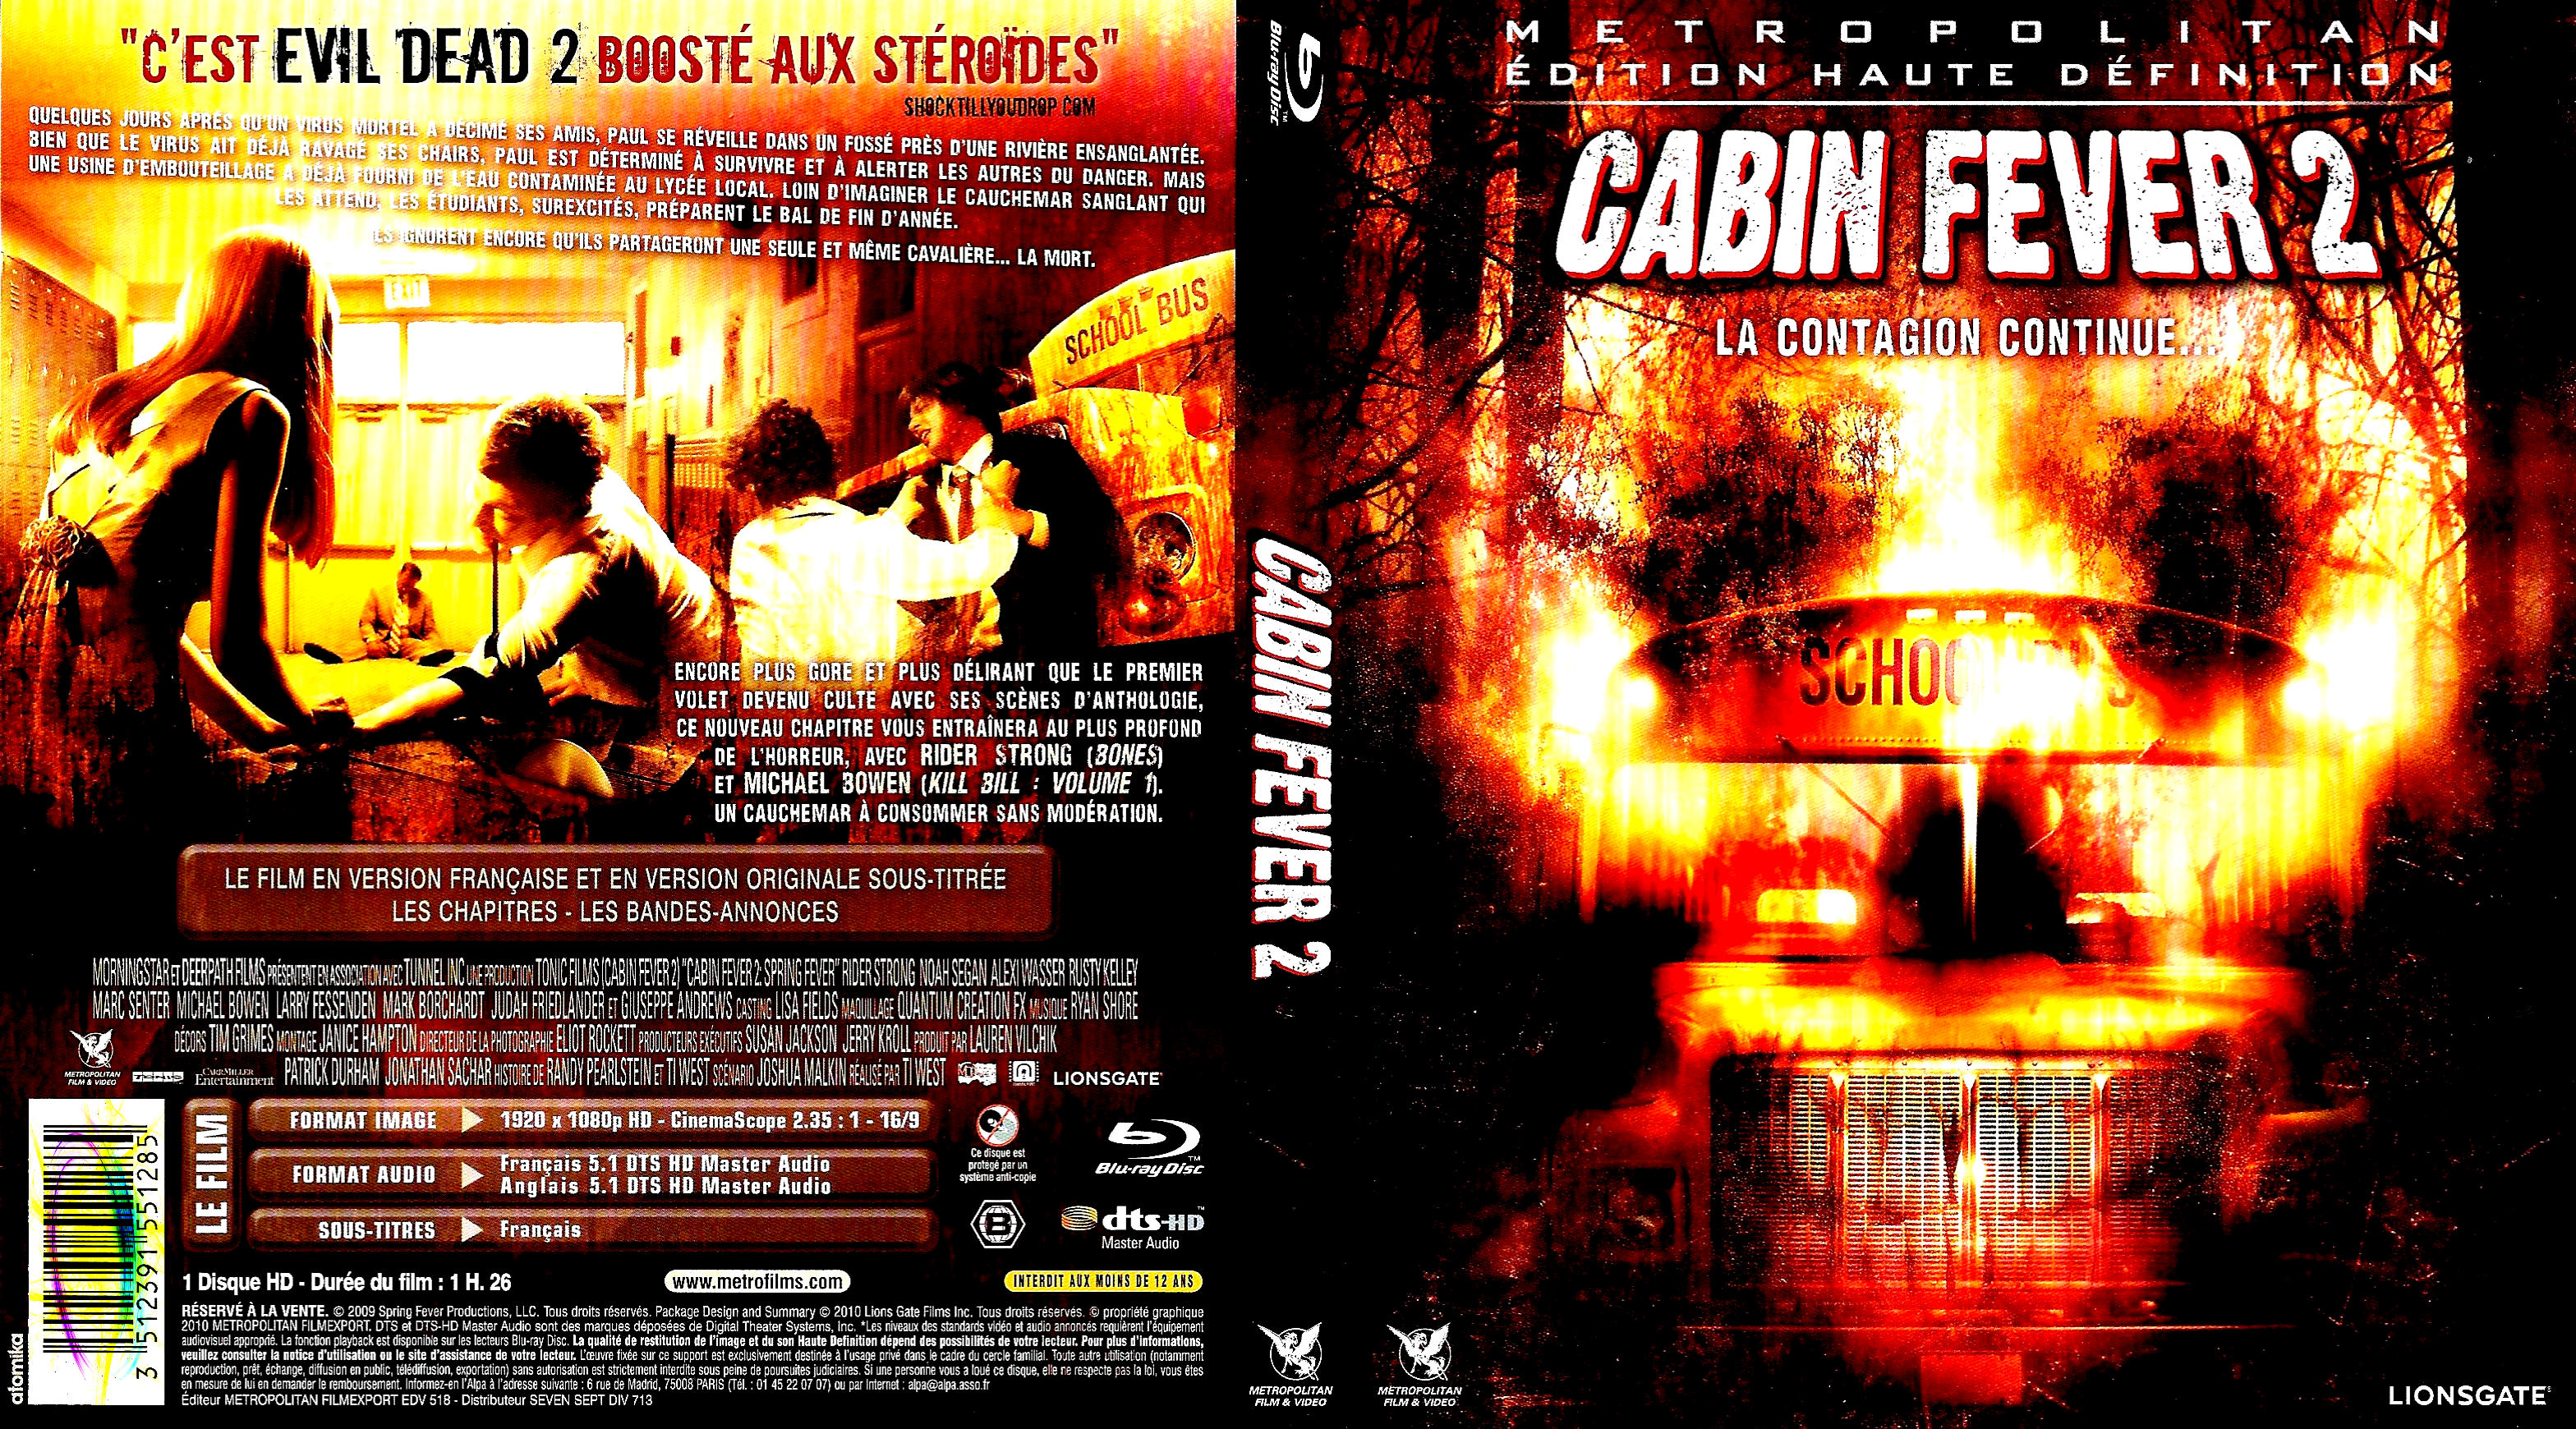 Jaquette DVD Cabin fever 2 (BLU-RAY)